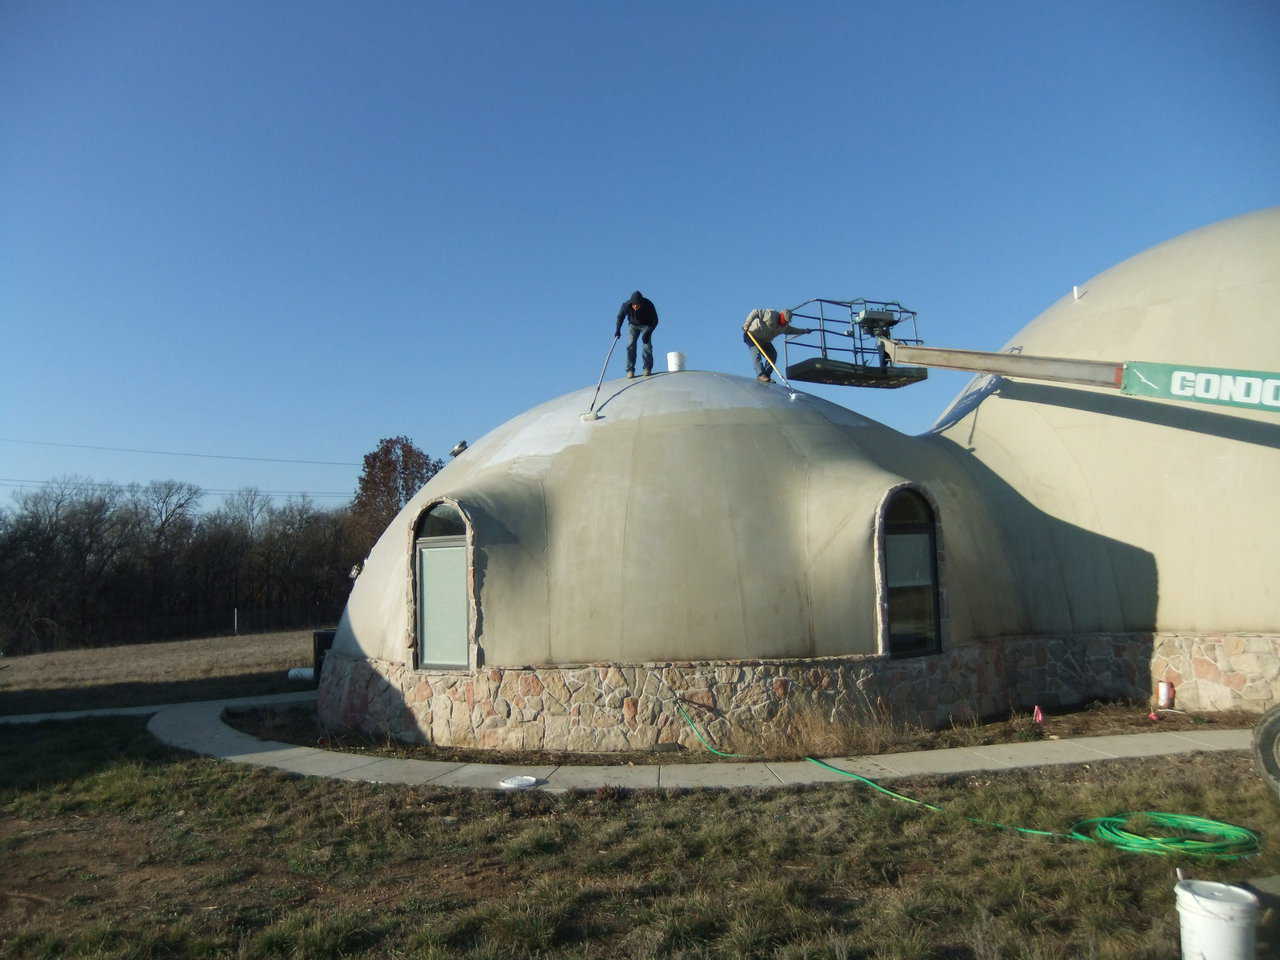 The crew then applied our MonoForm primer to the outside of the structure.